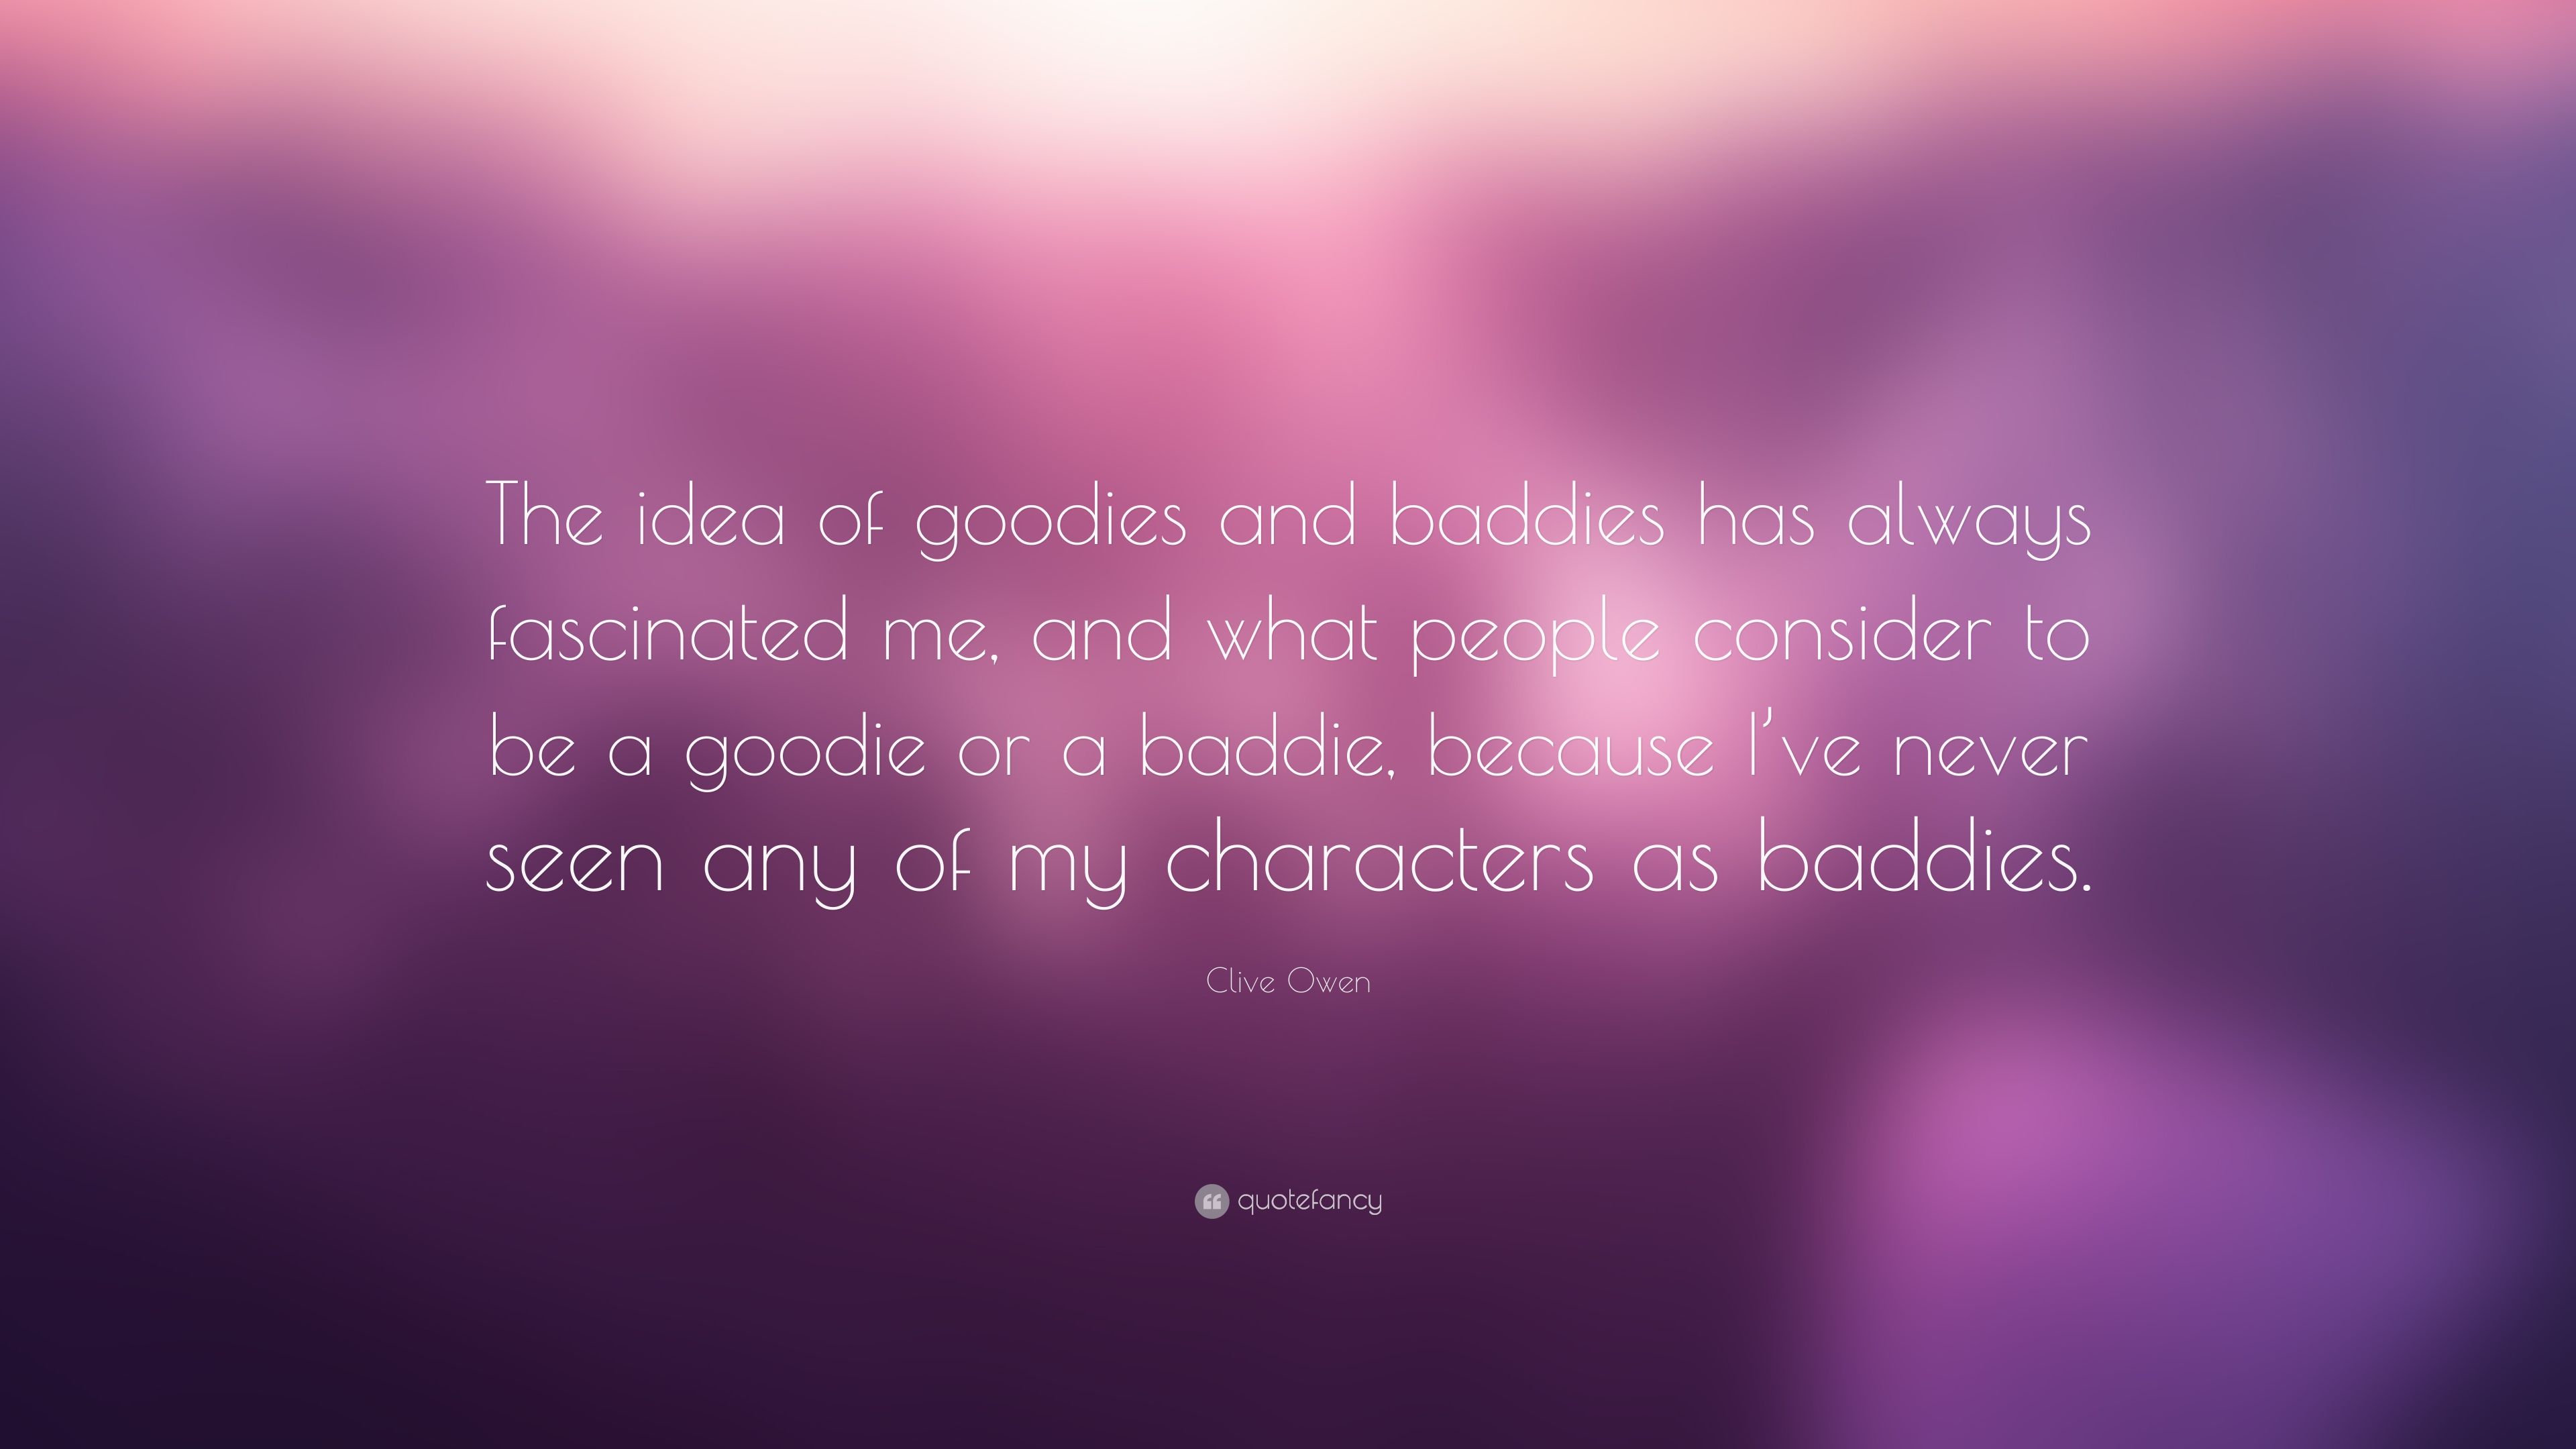 Clive Owen Quote: “The idea of goodies and baddies has always fascinated me, and what people consider to be a goodie or a baddie, because I.” (7 wallpaper)